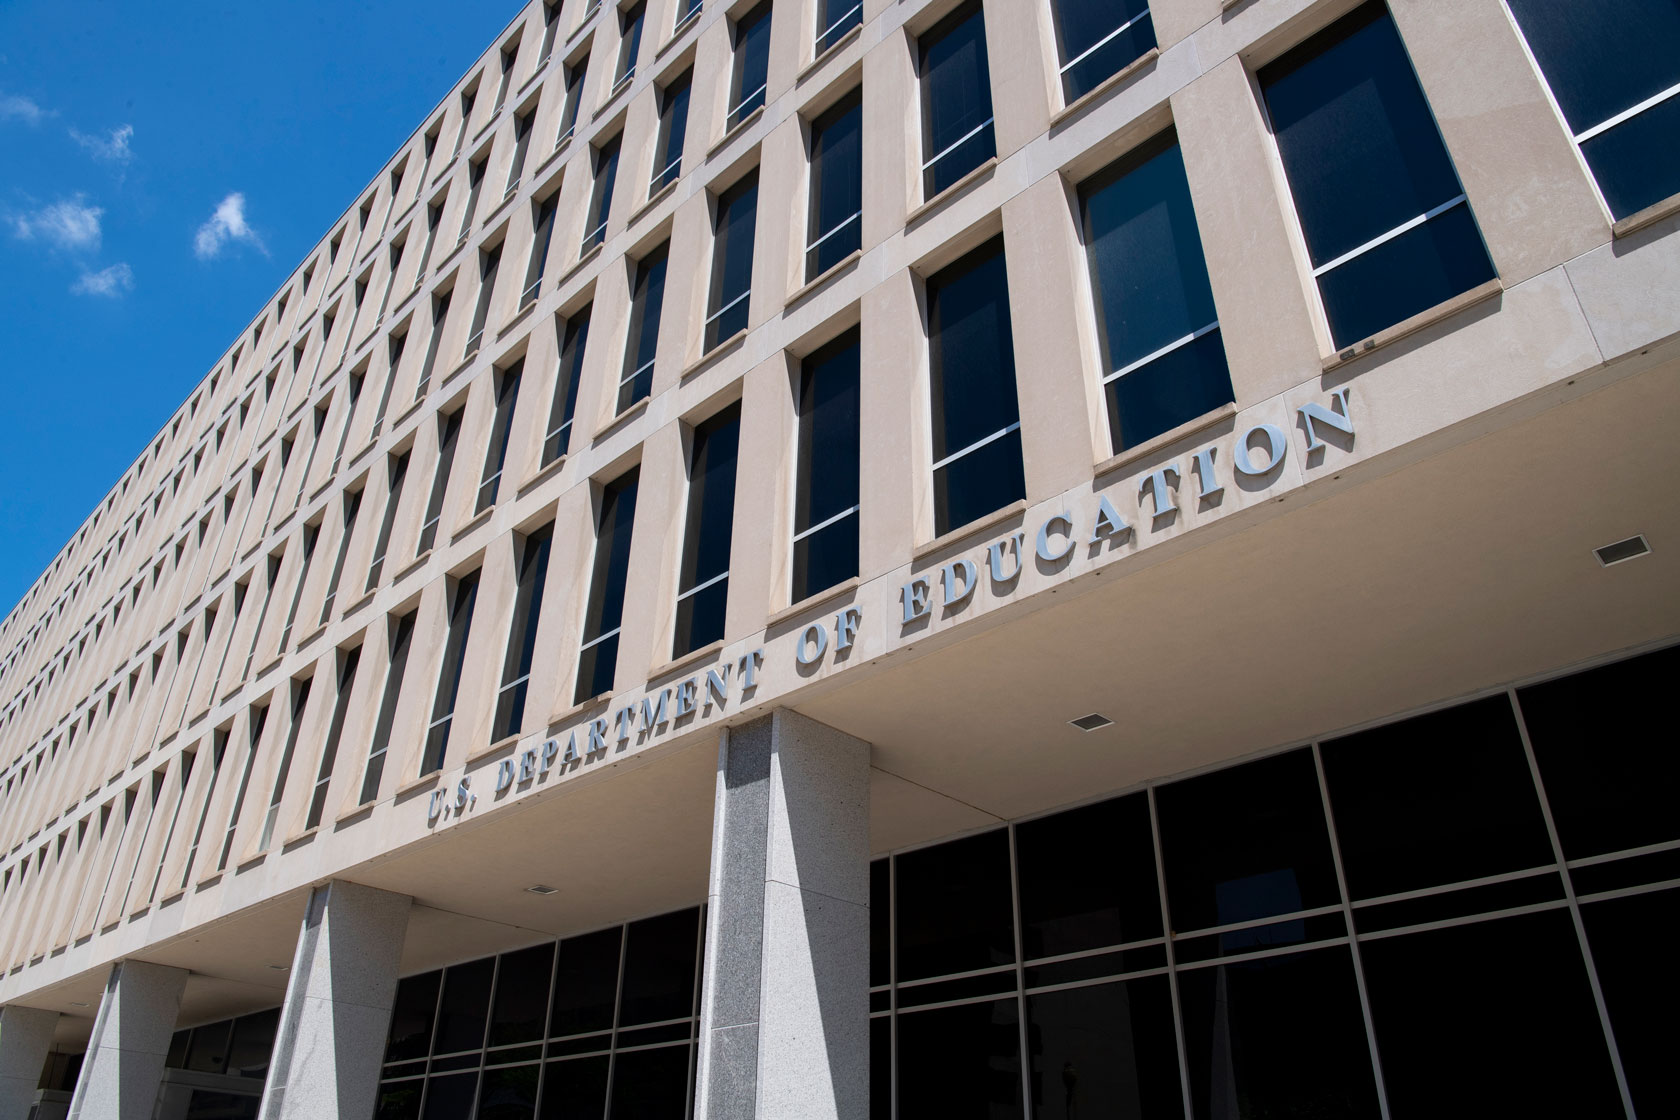 The U.S. Department of Education building is pictured in Washington, D.C.